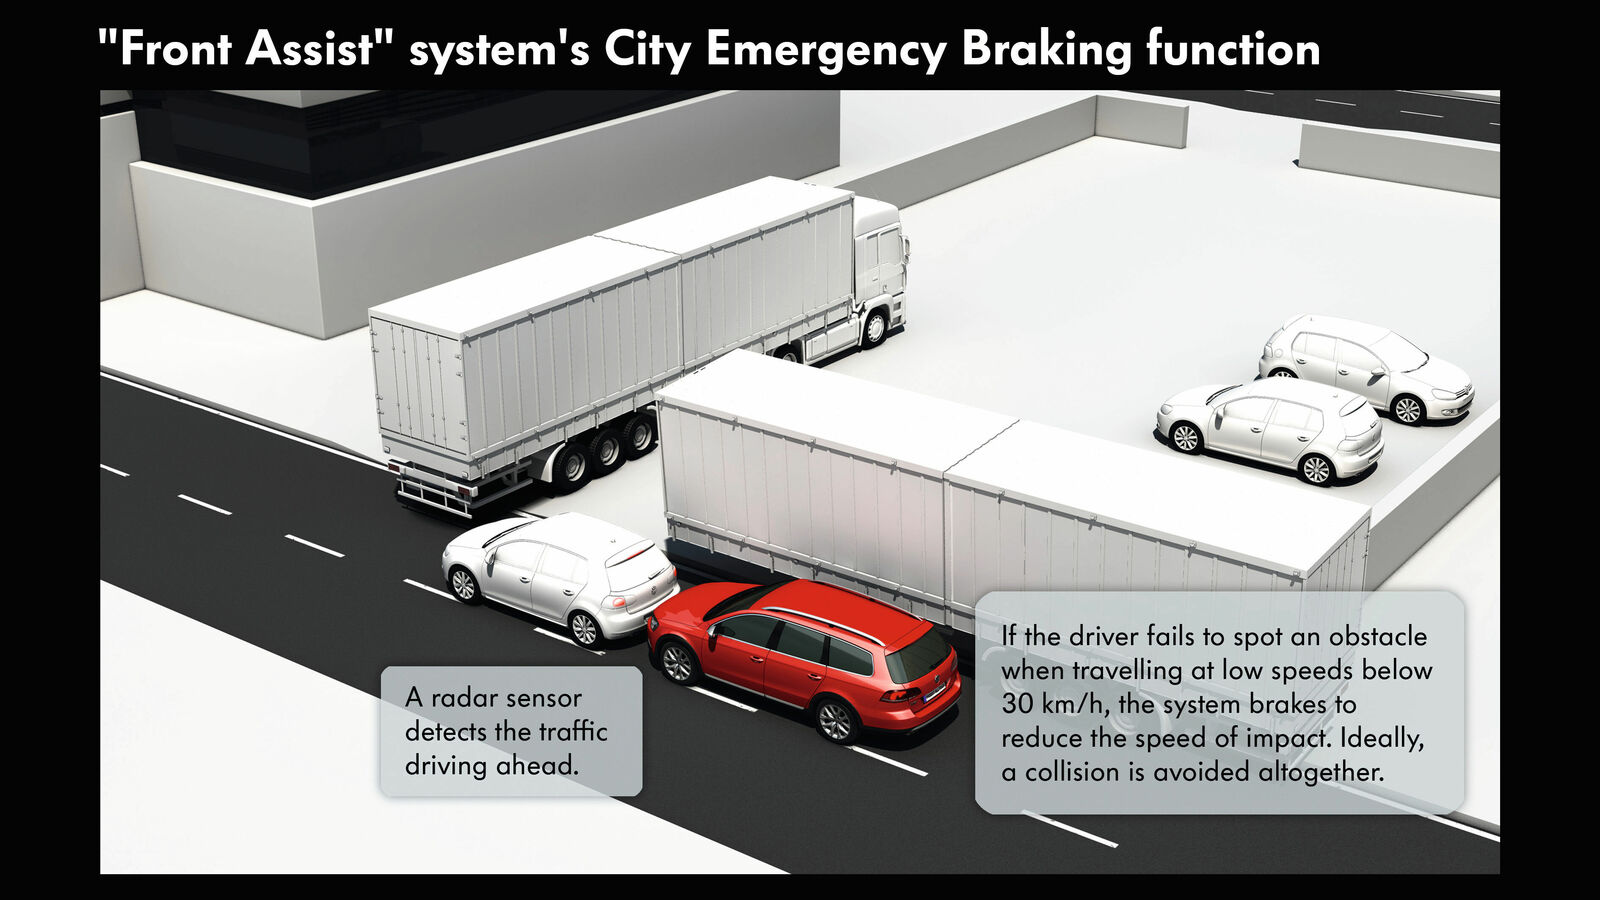 "Front Assist" system's City Emergency Braking function A radar sensor detects the traffic driving ahead.If the driver fails to spot an abstracle when travelling at low speeds below 30 km/h, the system brakes to reduce the speed of impact. Ideally, a collision is avoided altogether.